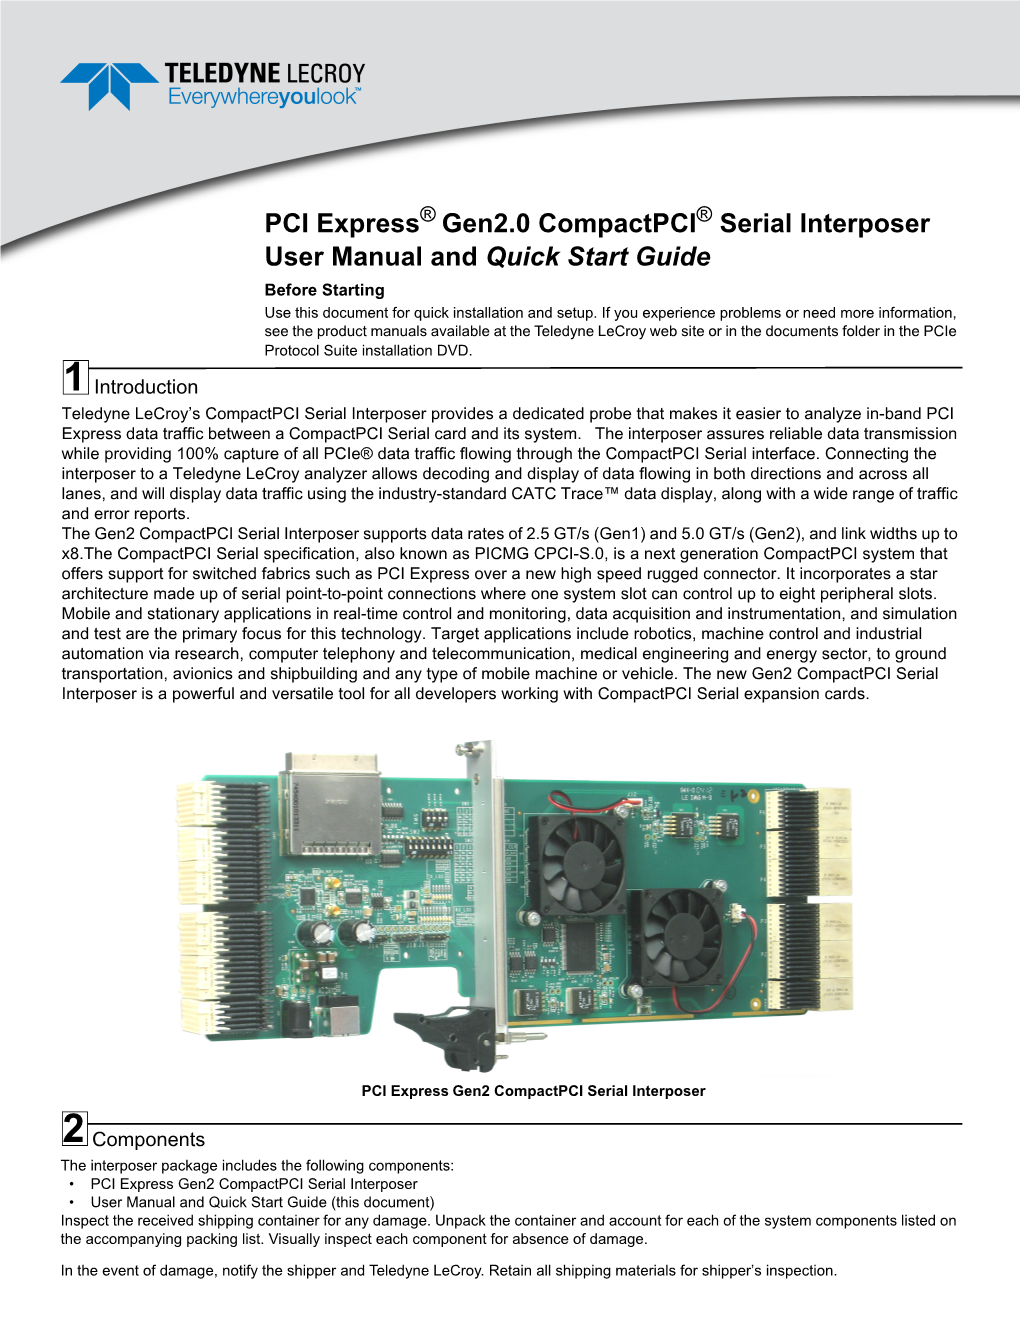 PCI Express® Gen2.0 Compactpci® Serial Interposer User Manual and Quick Start Guide Before Starting Use This Document for Quick Installation and Setup